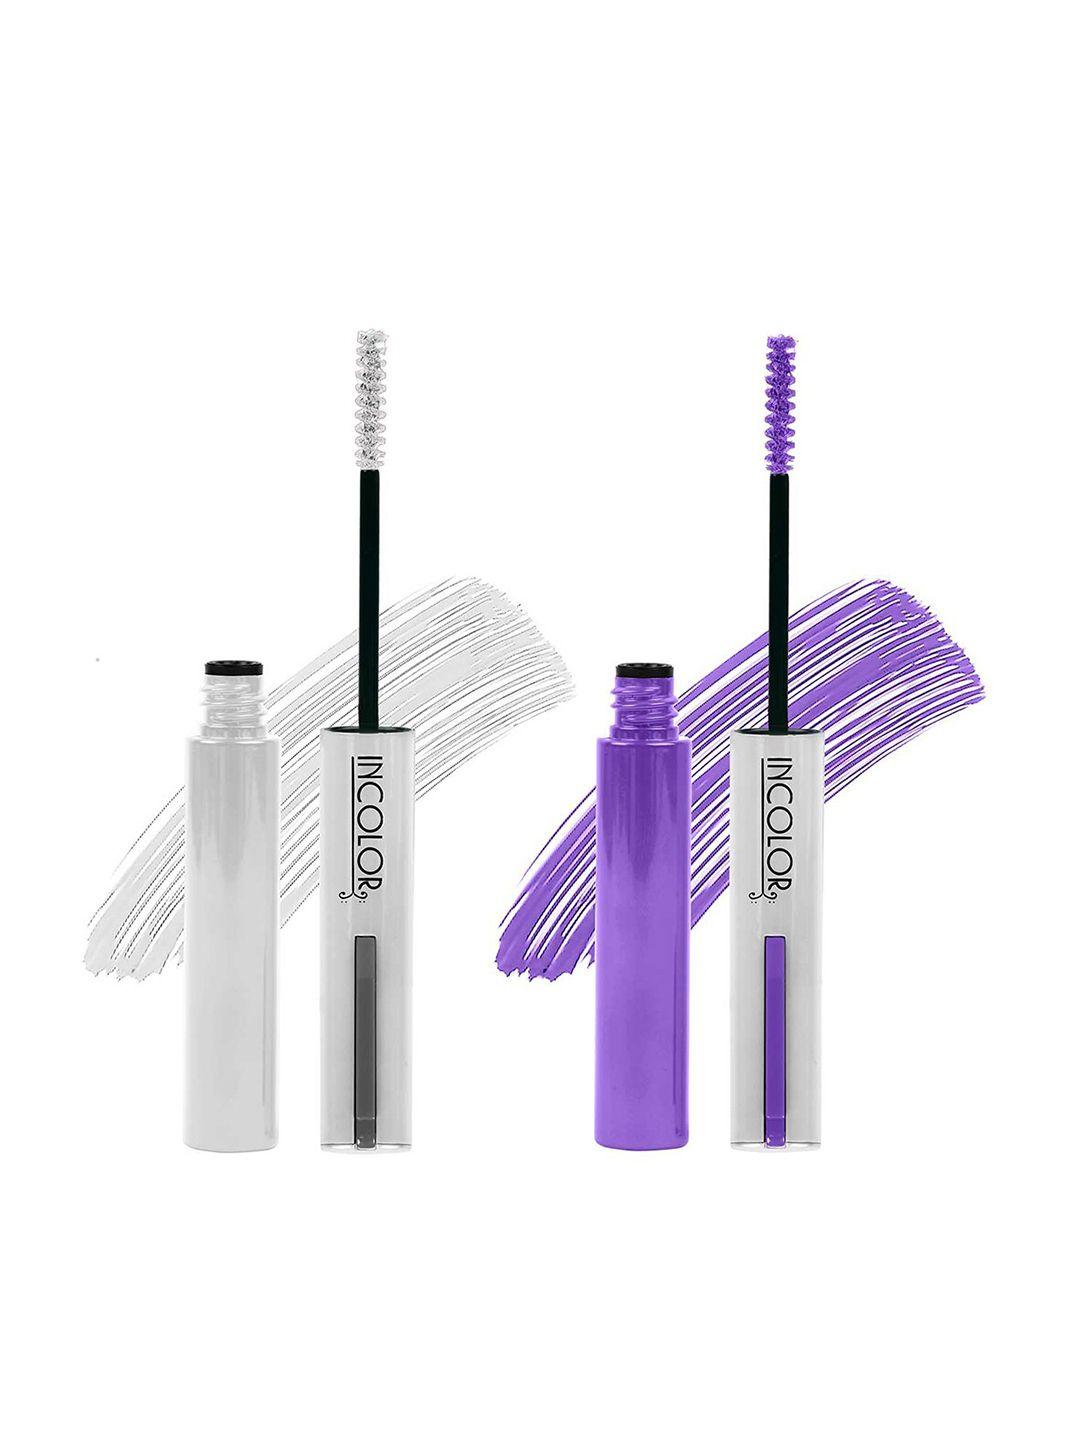 incolor-set-of-2-light-weight-color-mascara-6ml-each---true-purple-06-&-milky-white-02